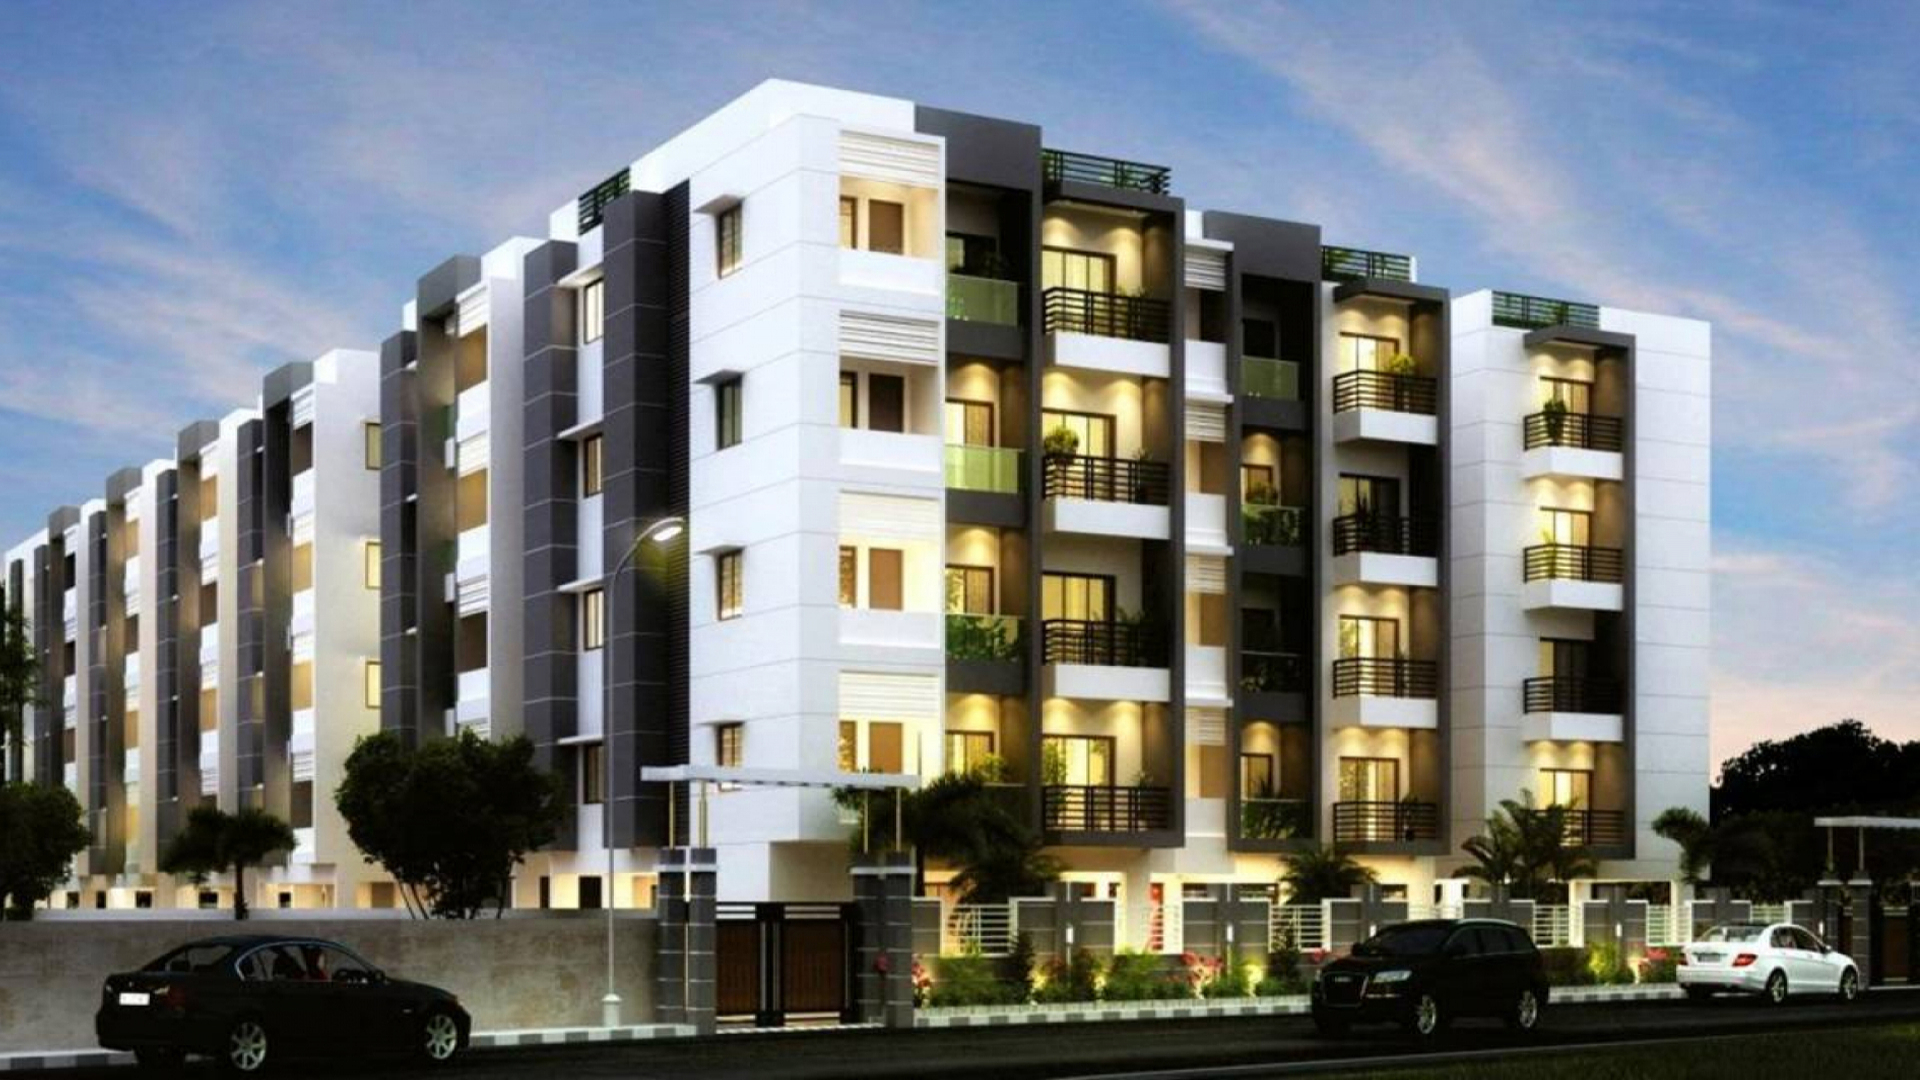 1, 2, 3 BHK Apartment for sale in Chembarambakkam